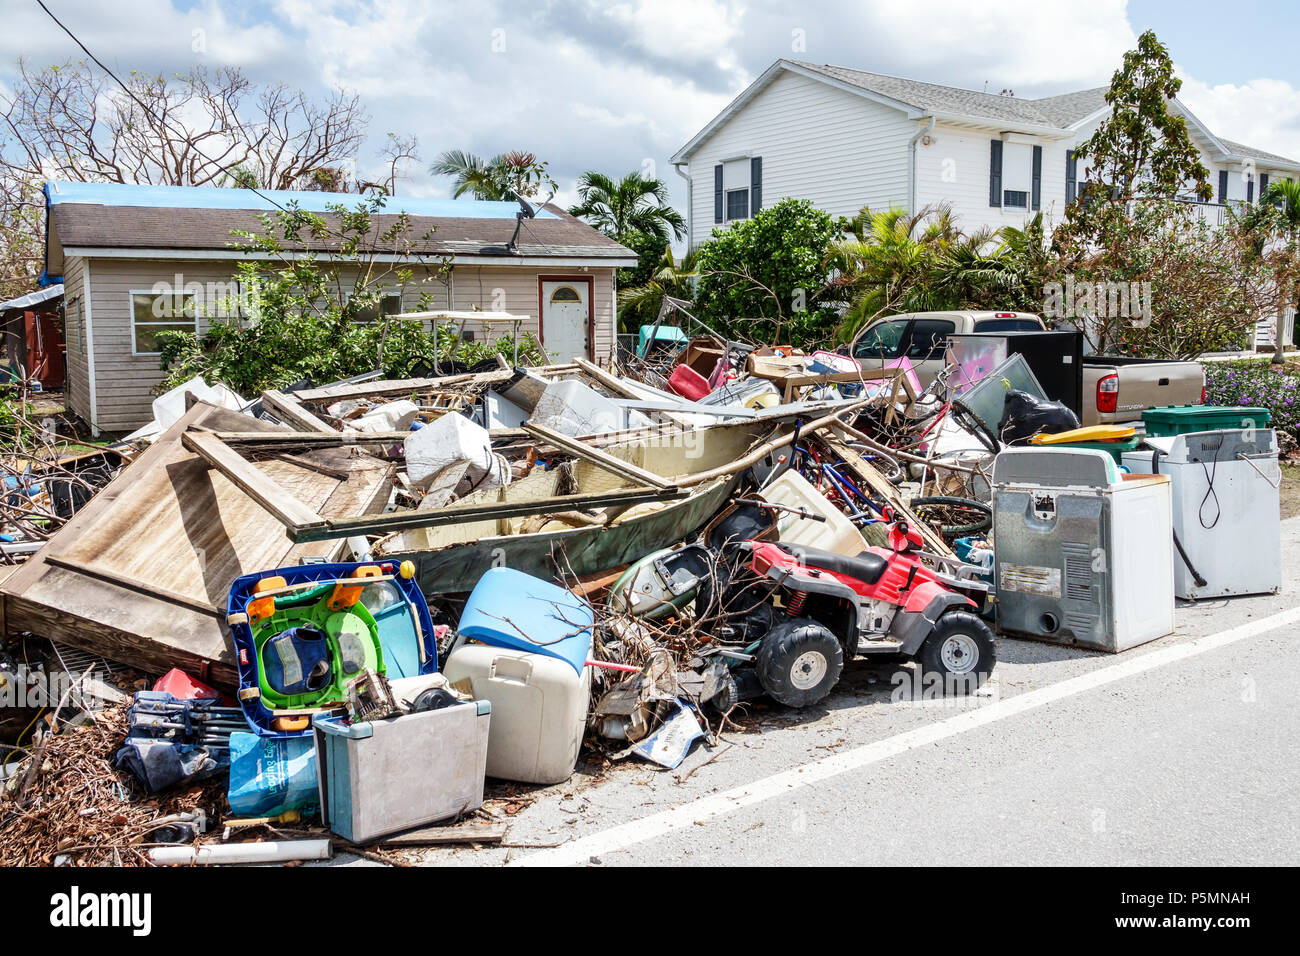 Everglades City Florida,after Hurricane Irma,houses homes residences,storm disaster recovery cleanup,flood surge damage destruction aftermath,trash,de Stock Photo